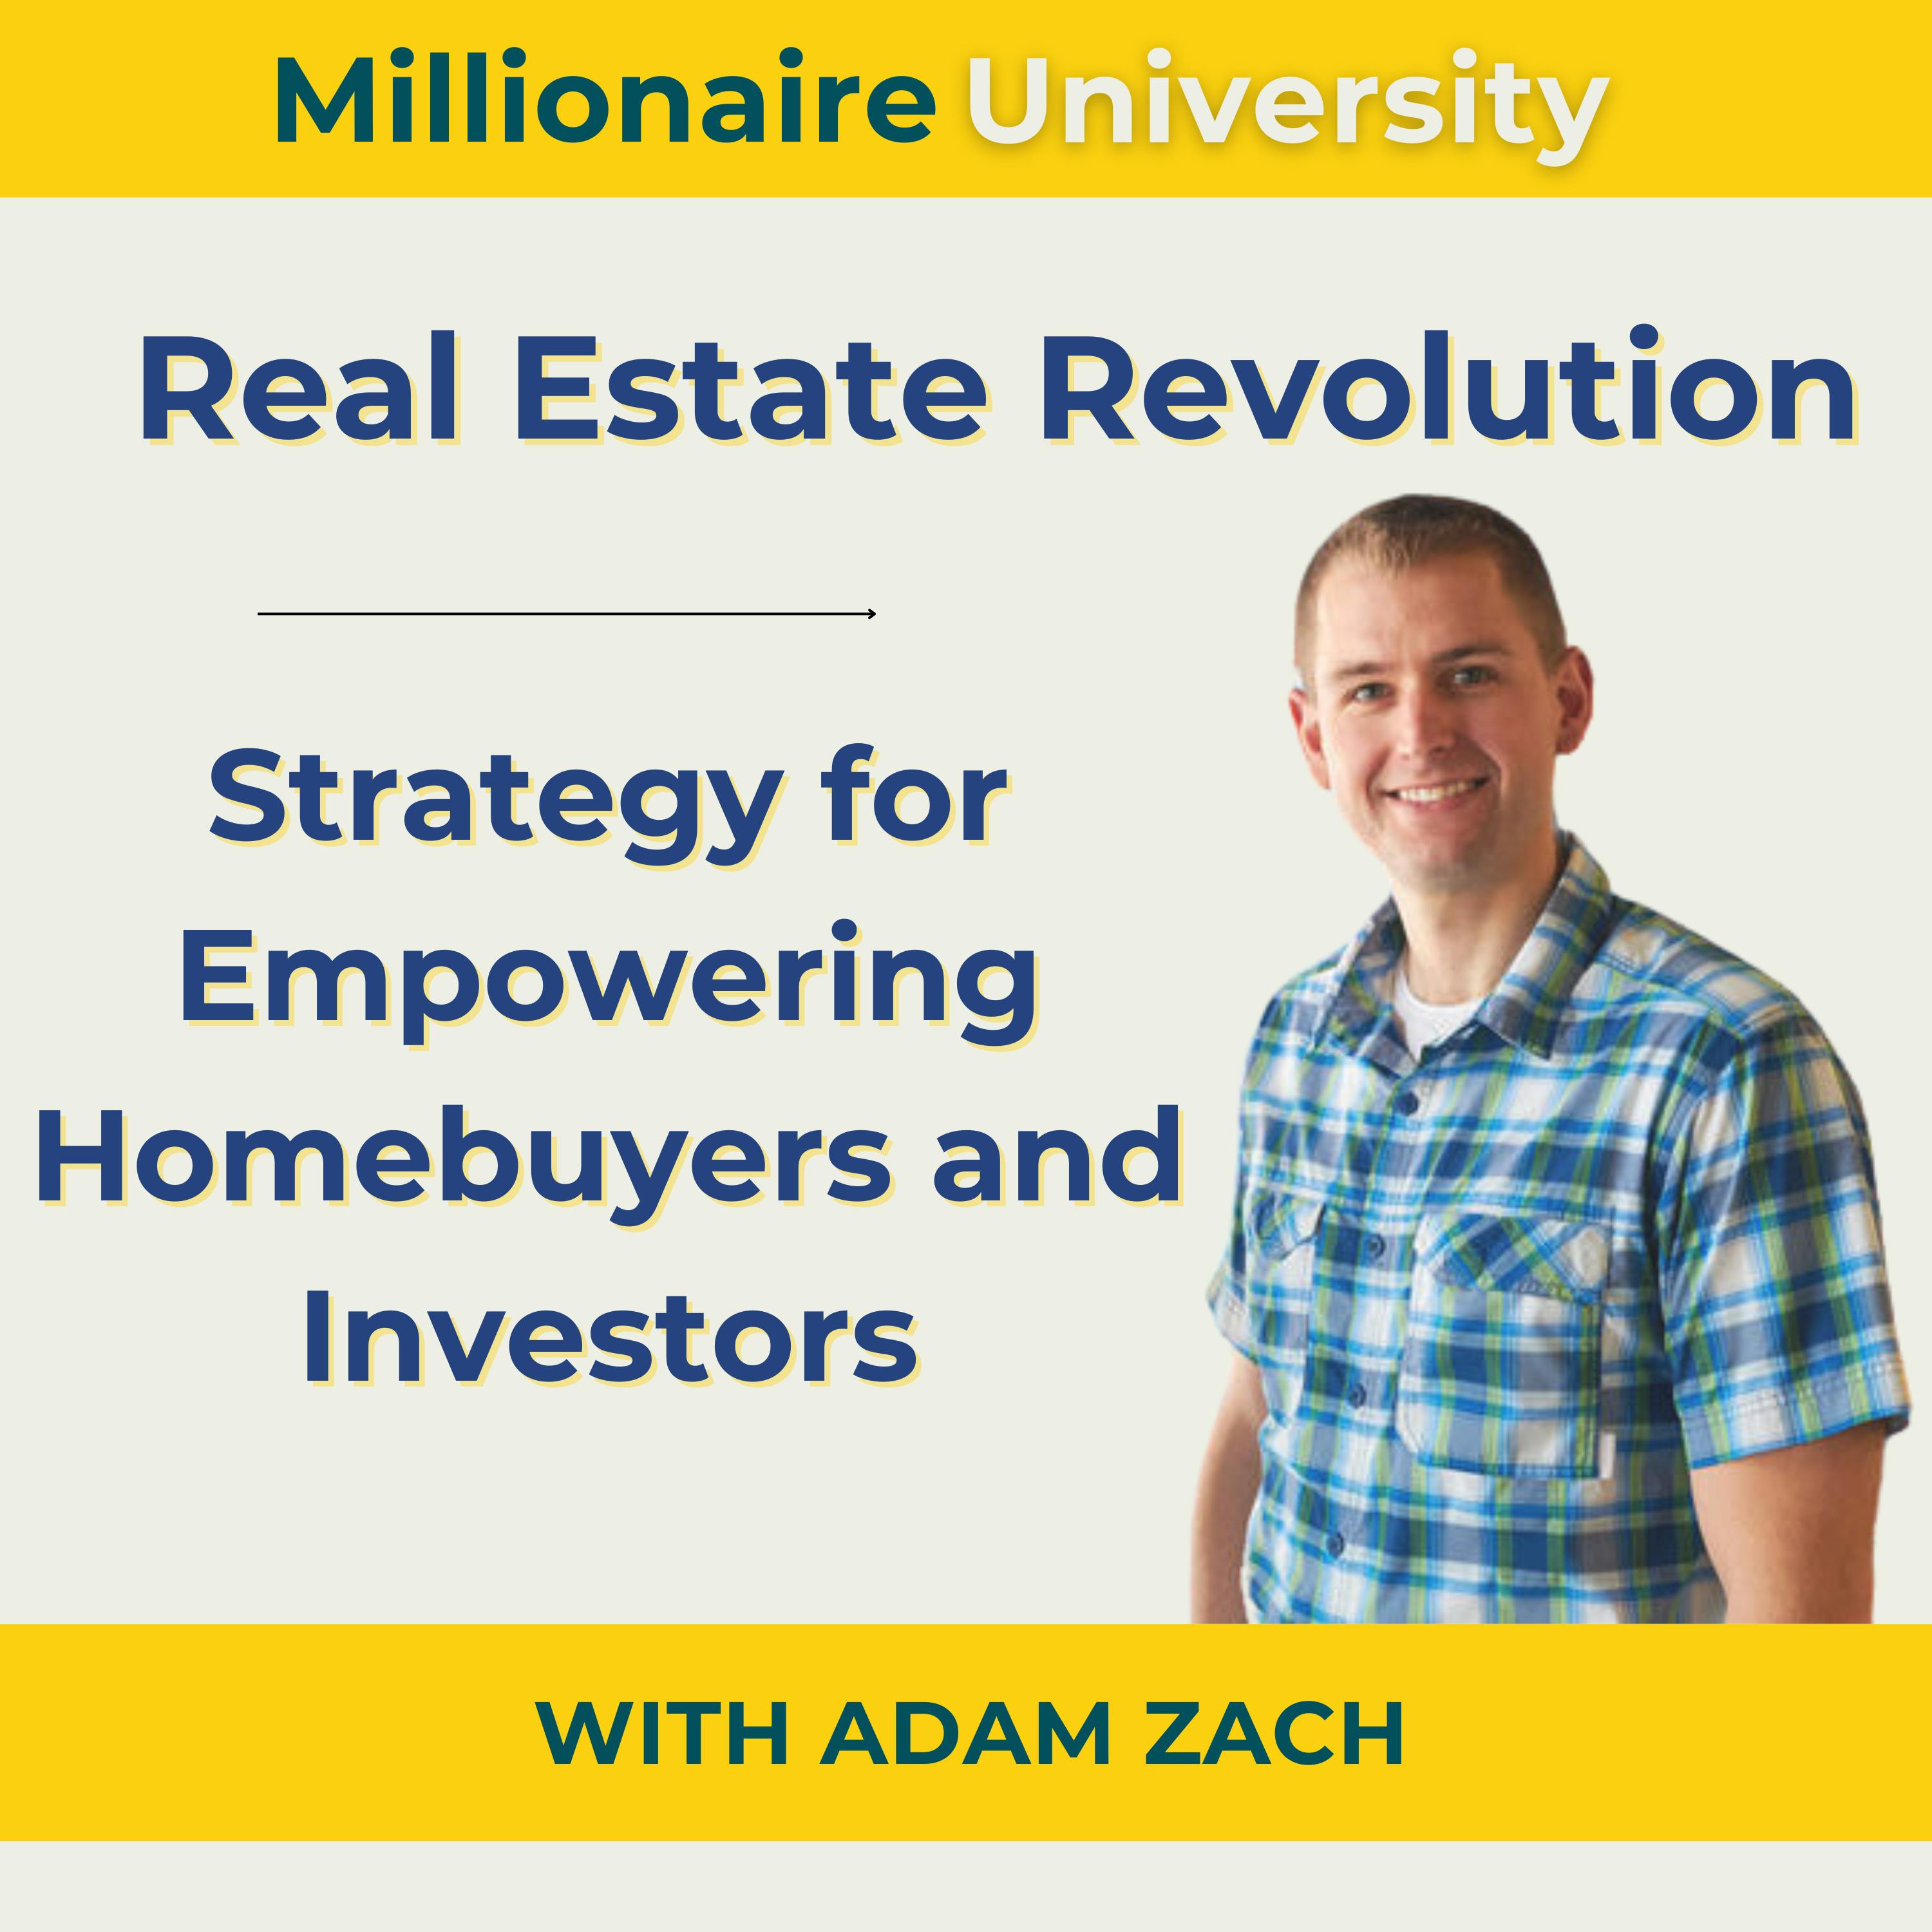 110. Real Estate Revolution: Adam Zach's Strategy for Empowering Homebuyers and Investors